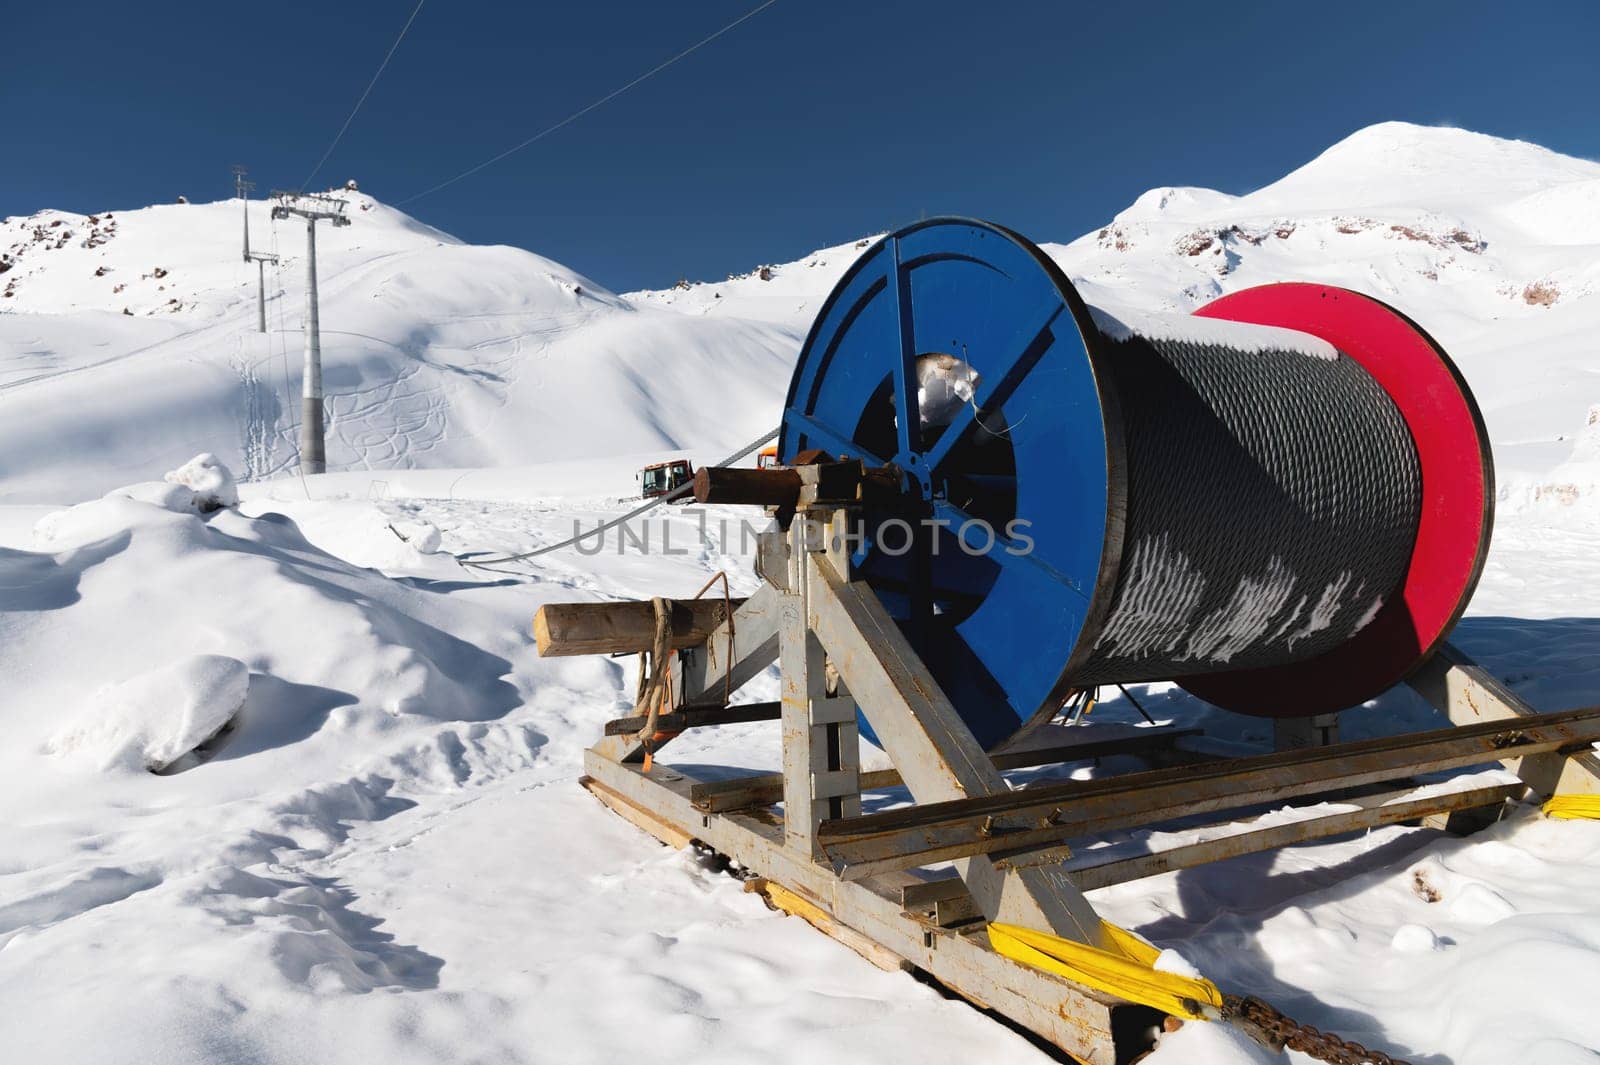 Power cable on reels. Thick electrical wire. Wire spools for outdoor use. Electrical products at a ski resort en street in the snow.